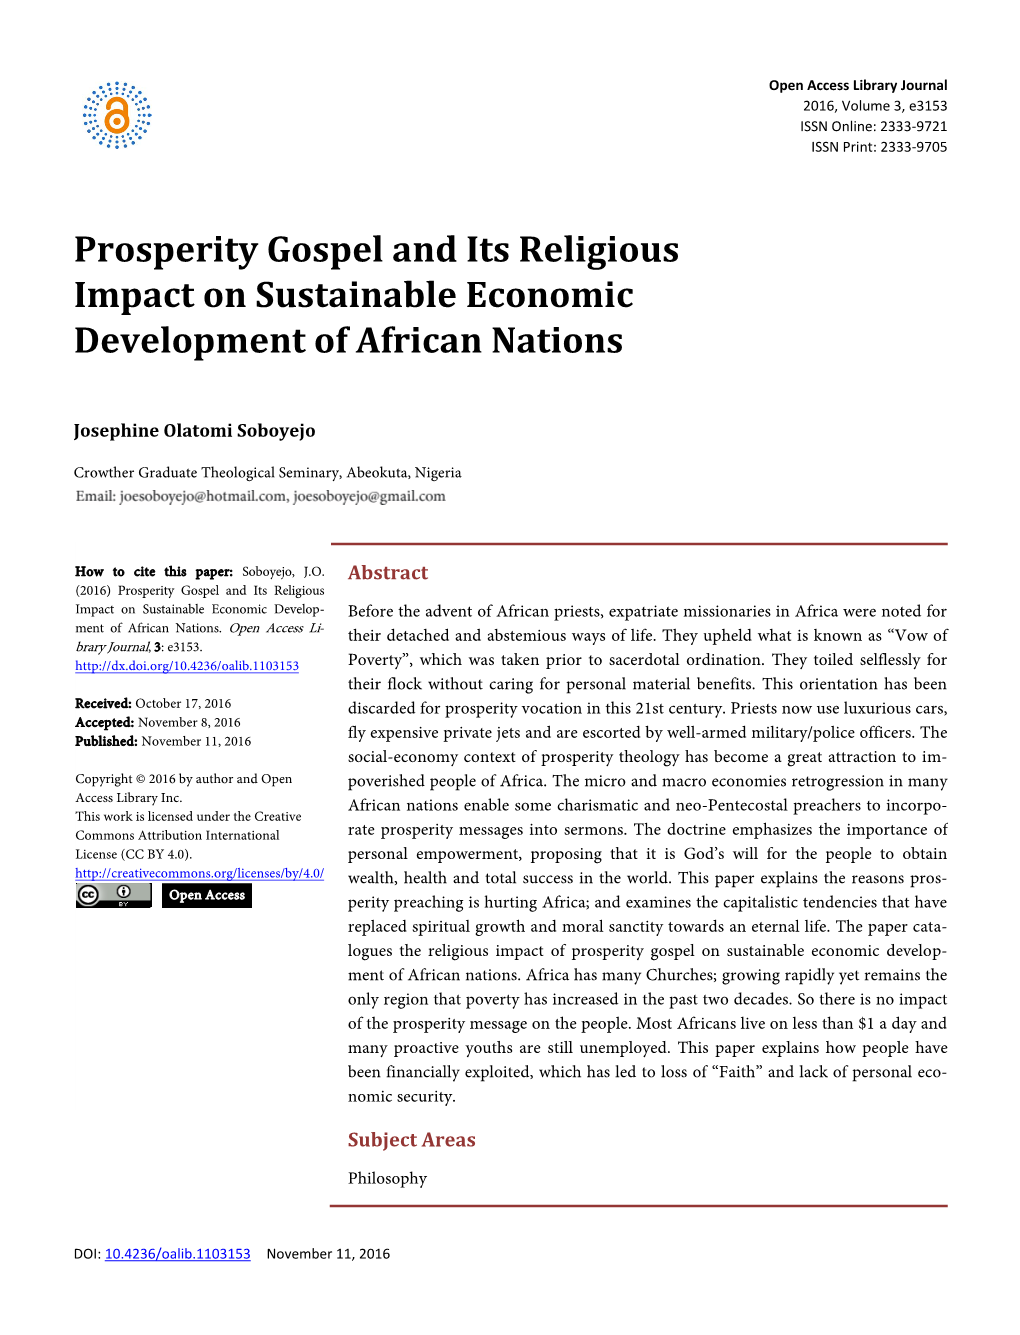 Prosperity Gospel and Its Religious Impact on Sustainable Economic Development of African Nations